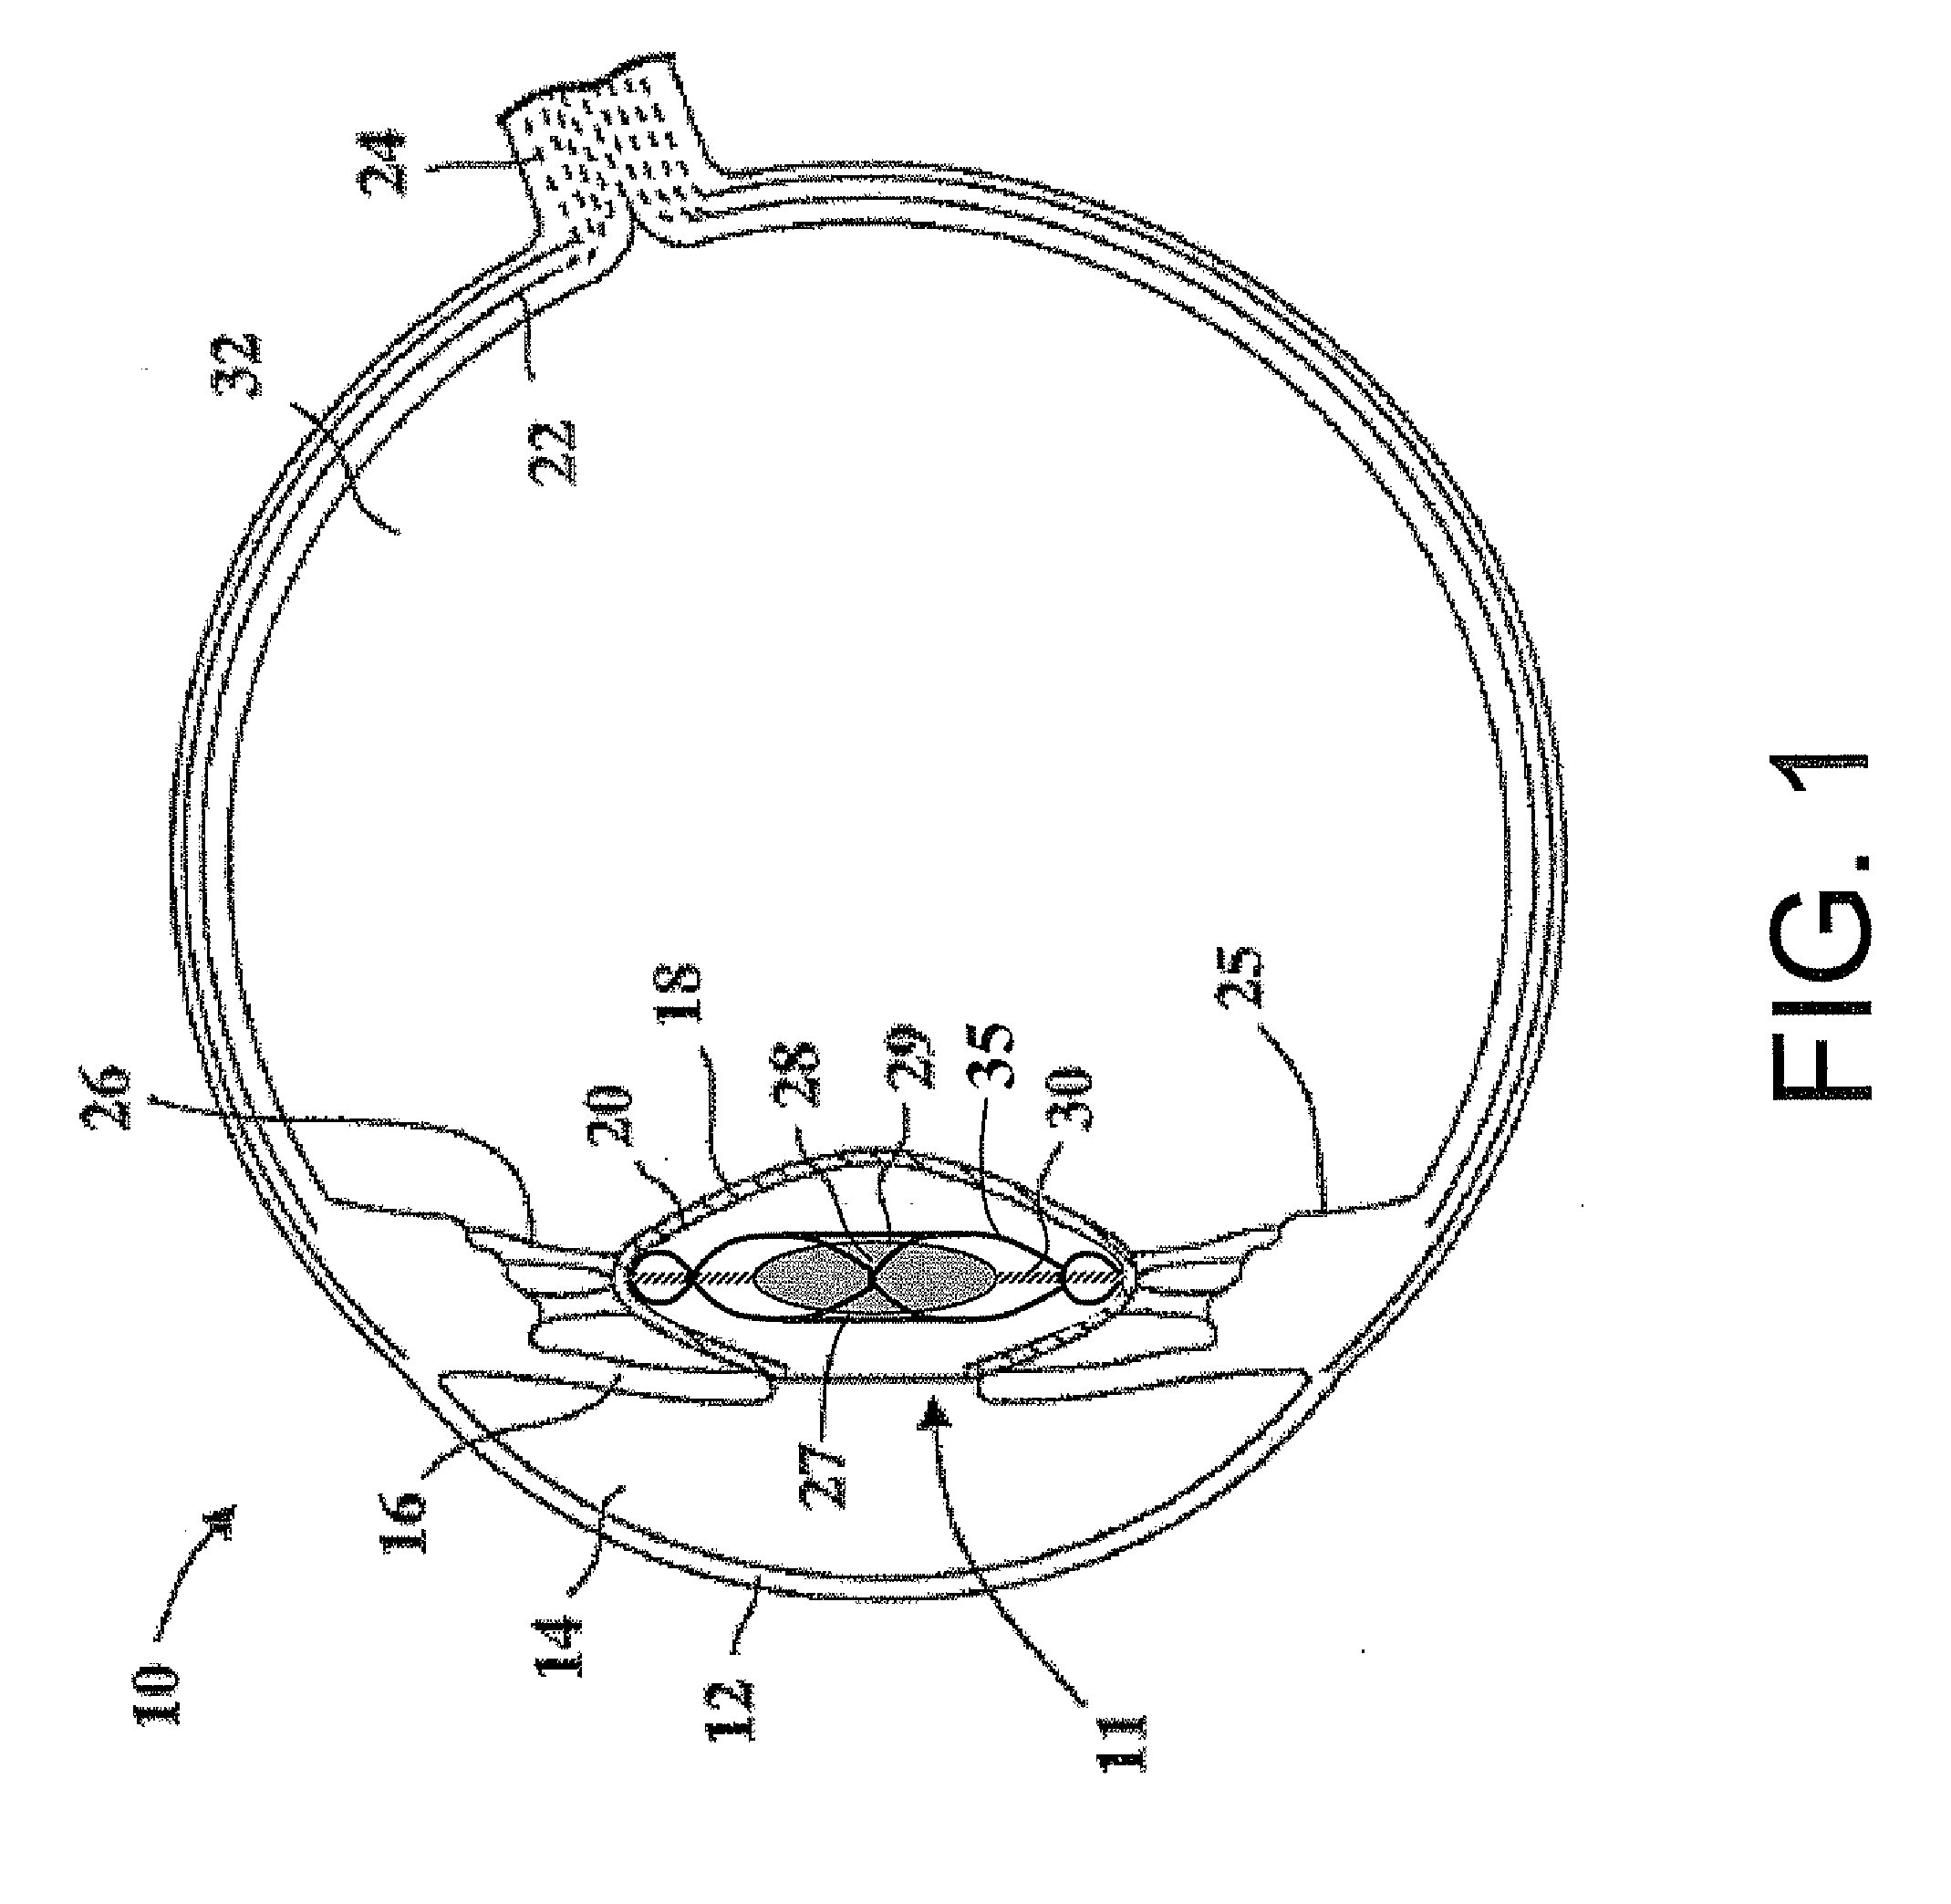 Intraocular lens and capsular ring